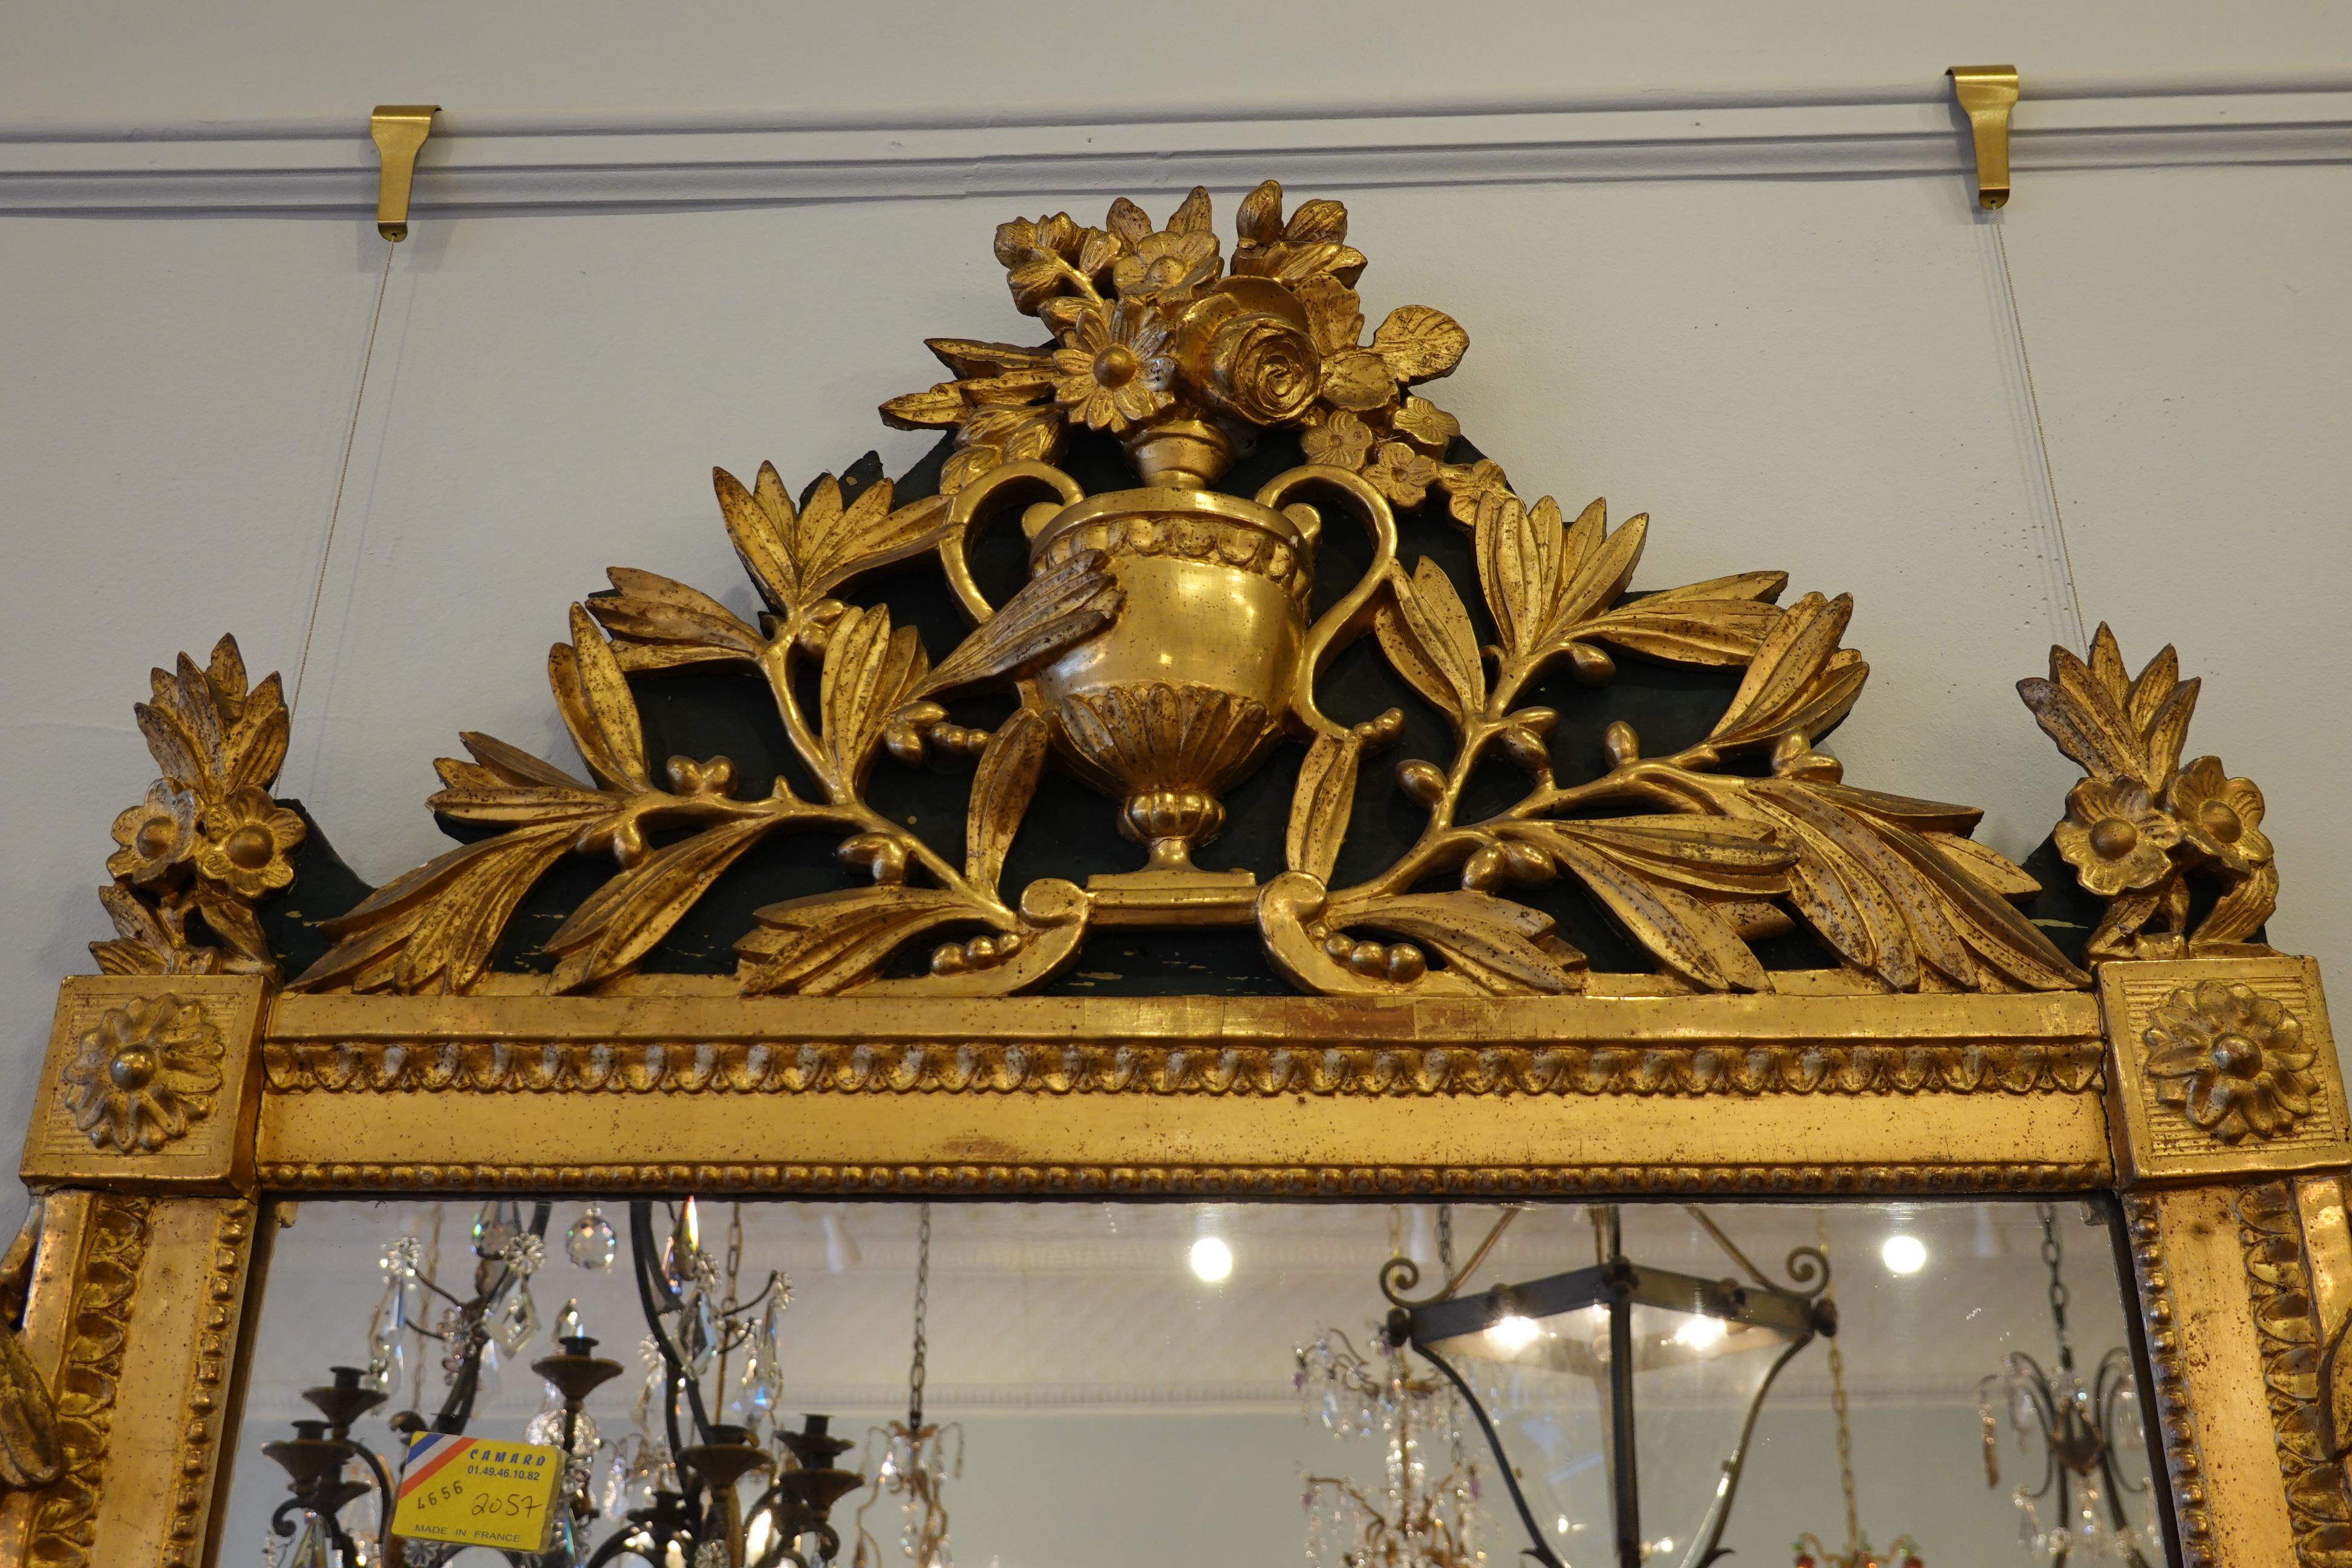 18th Century Louis XVI Period Giltwood Trumeau Mirror with Urn, Flowers and Laurel Leaves For Sale